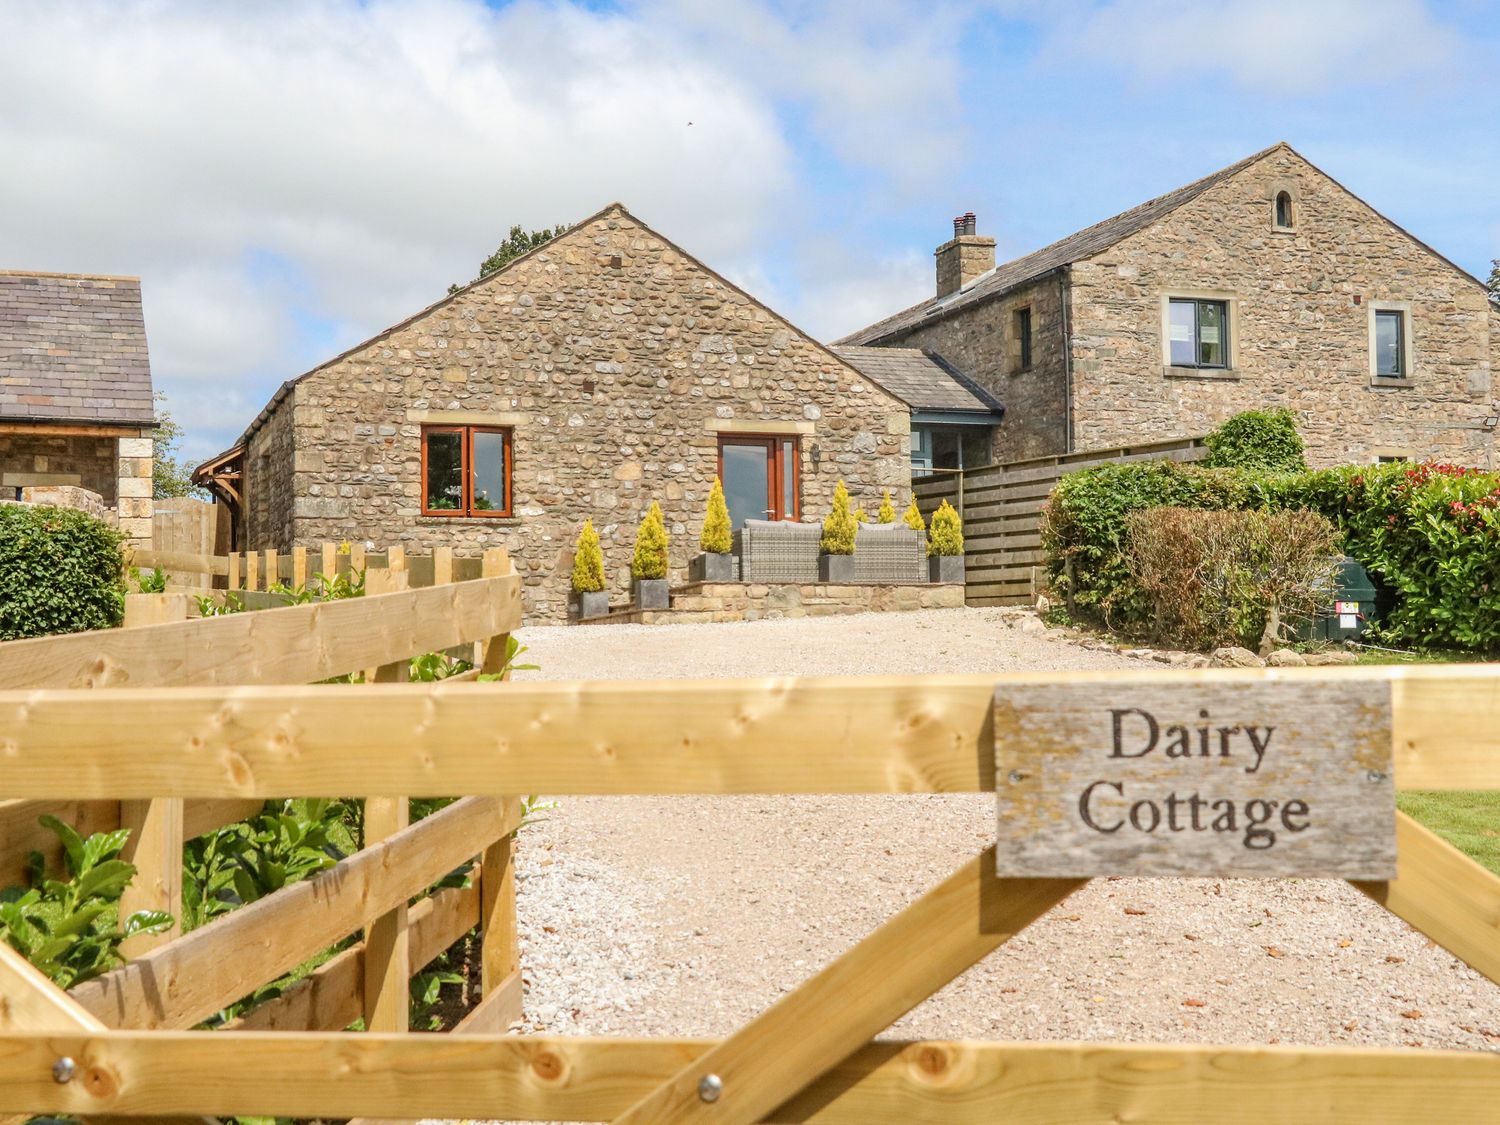 Dairy Cottage - Yorkshire Dales - 1112860 - photo 1